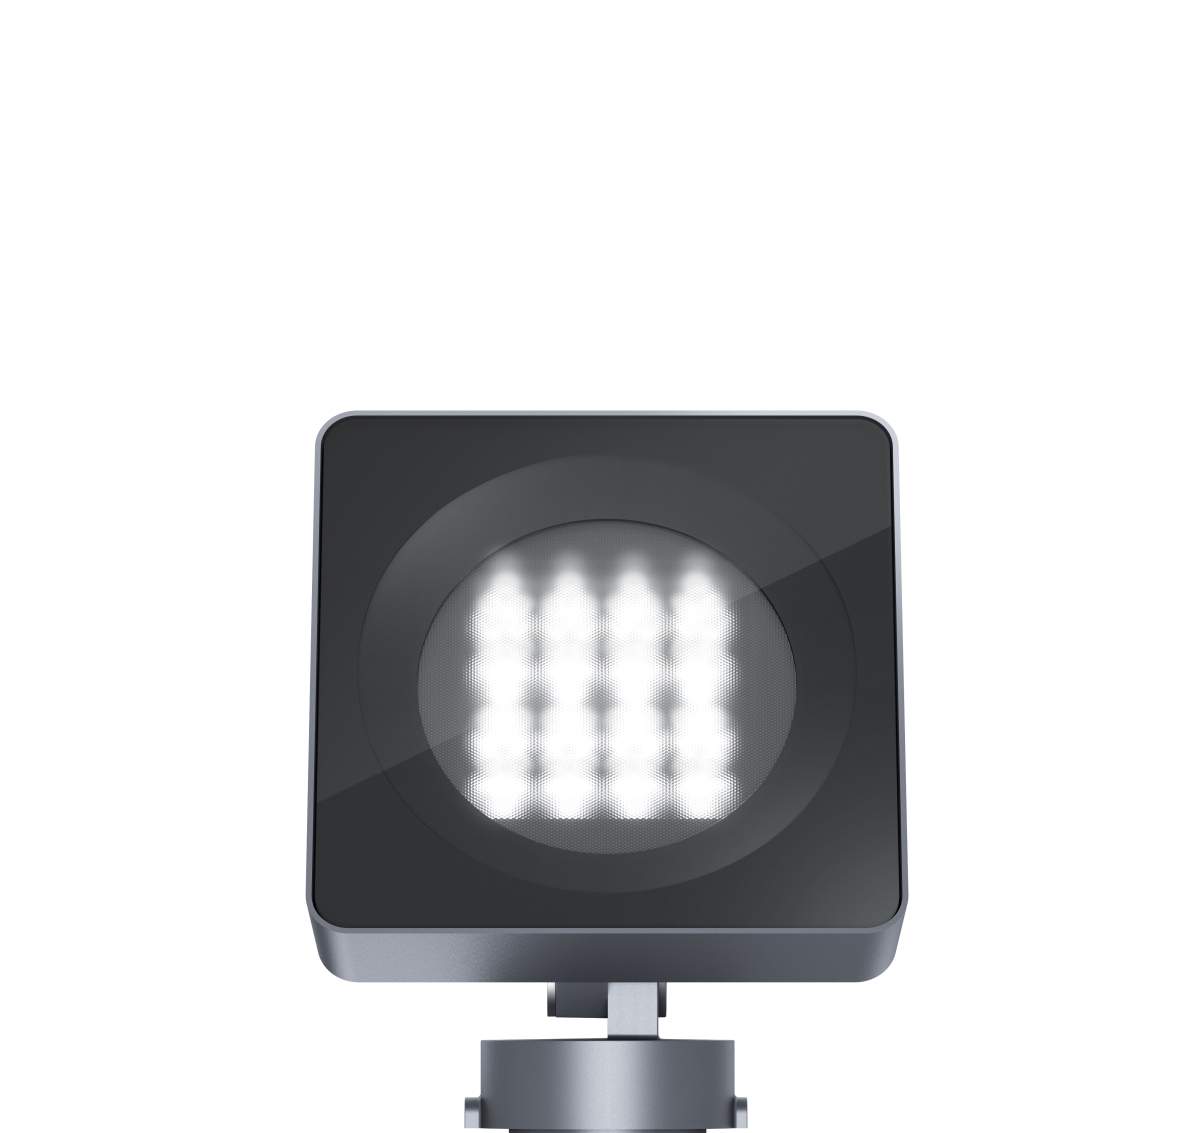 Lightscan IP65 Surf Mtd Floodlight With Mounting Plate Oval Flood Beam 96W LED 4000K DALI Graphit M